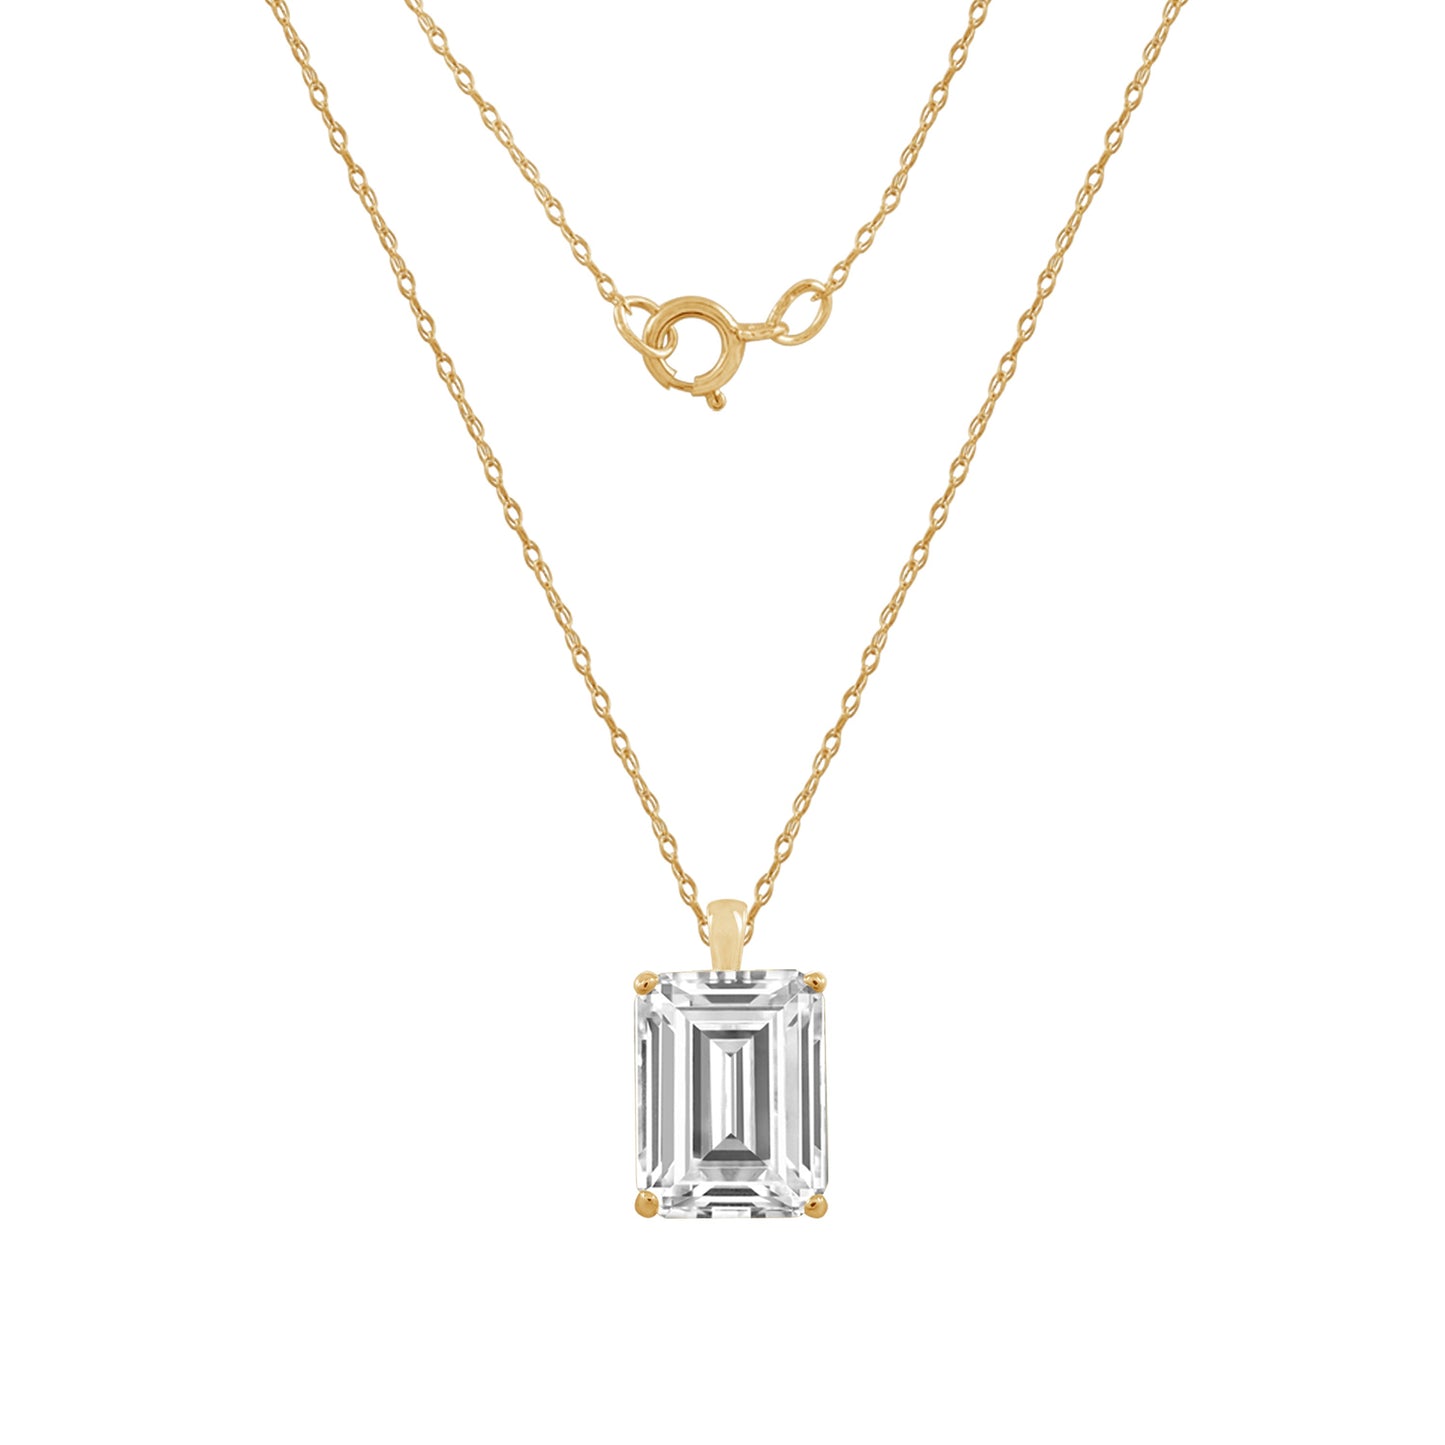 10K Solid Gold Solitaire Necklace